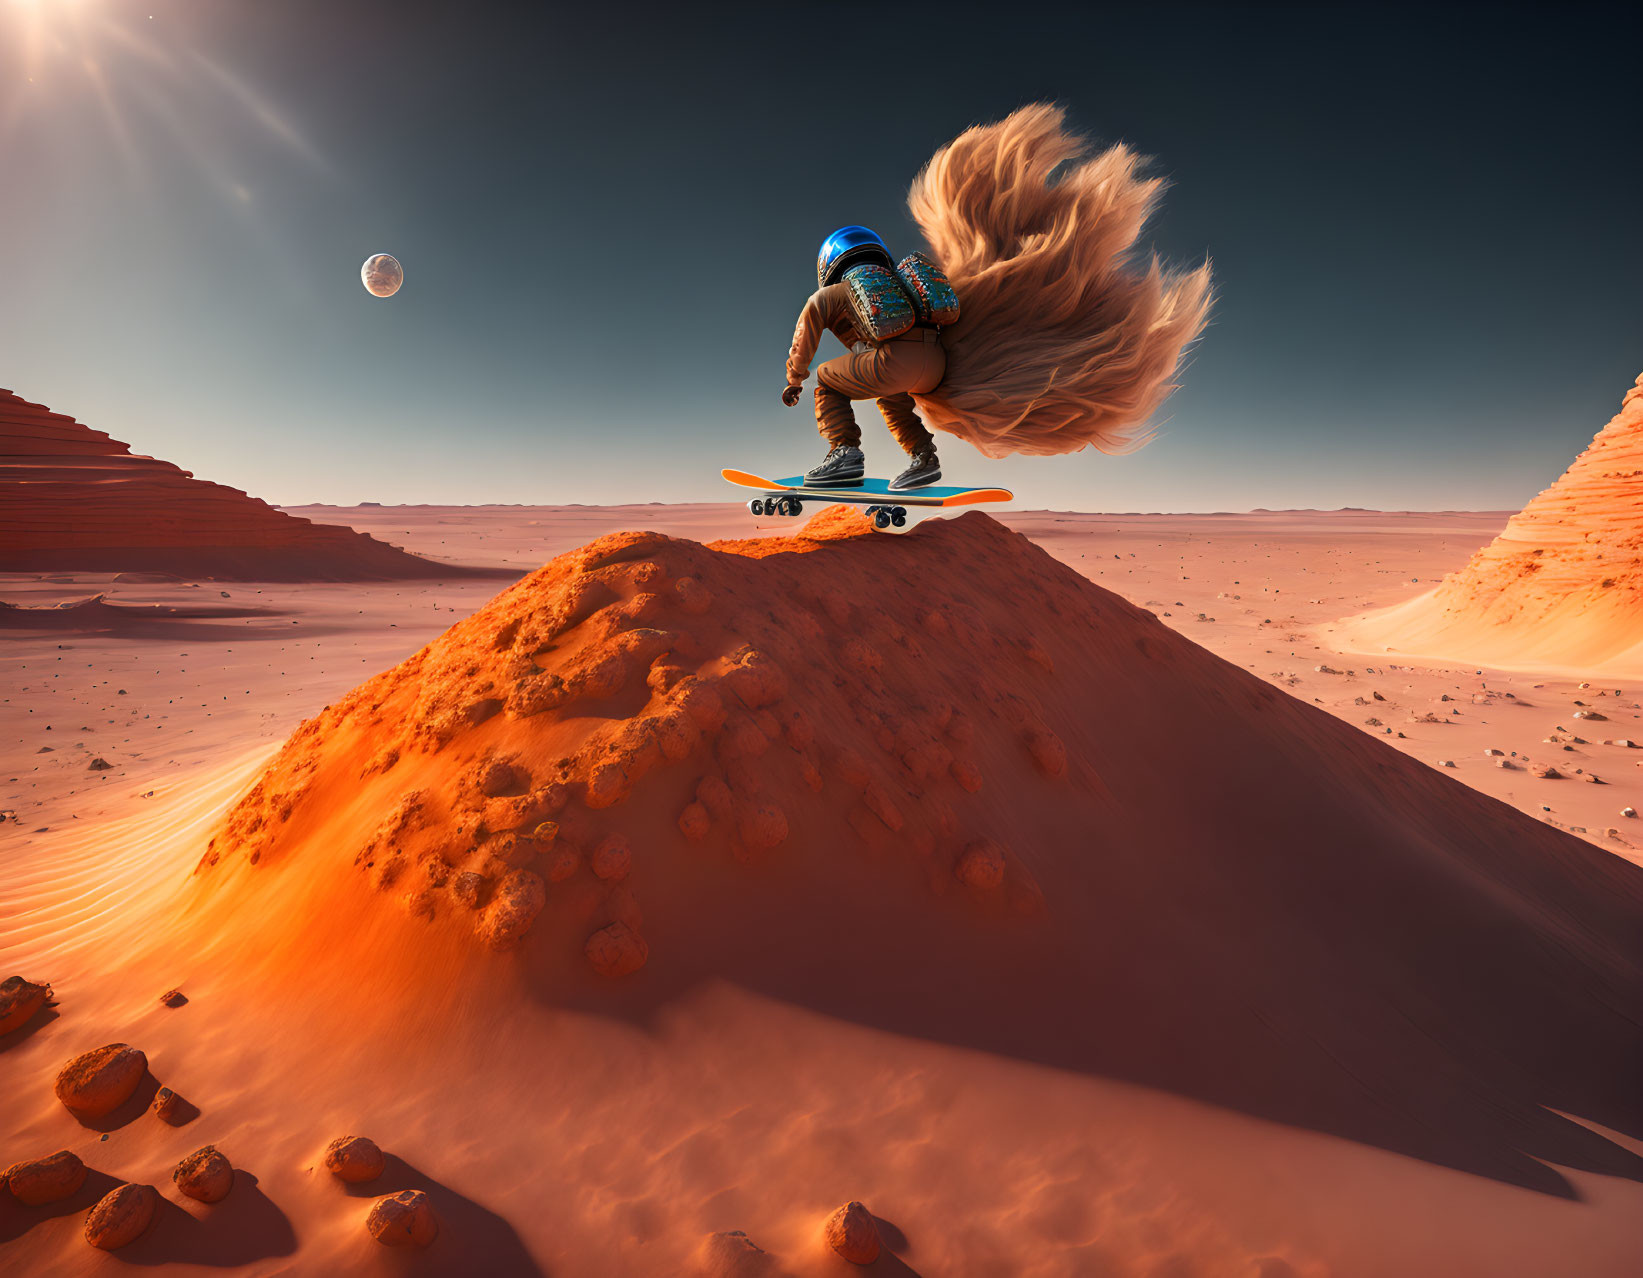 Skateboarder on Mars-like dune with moon and red terrain